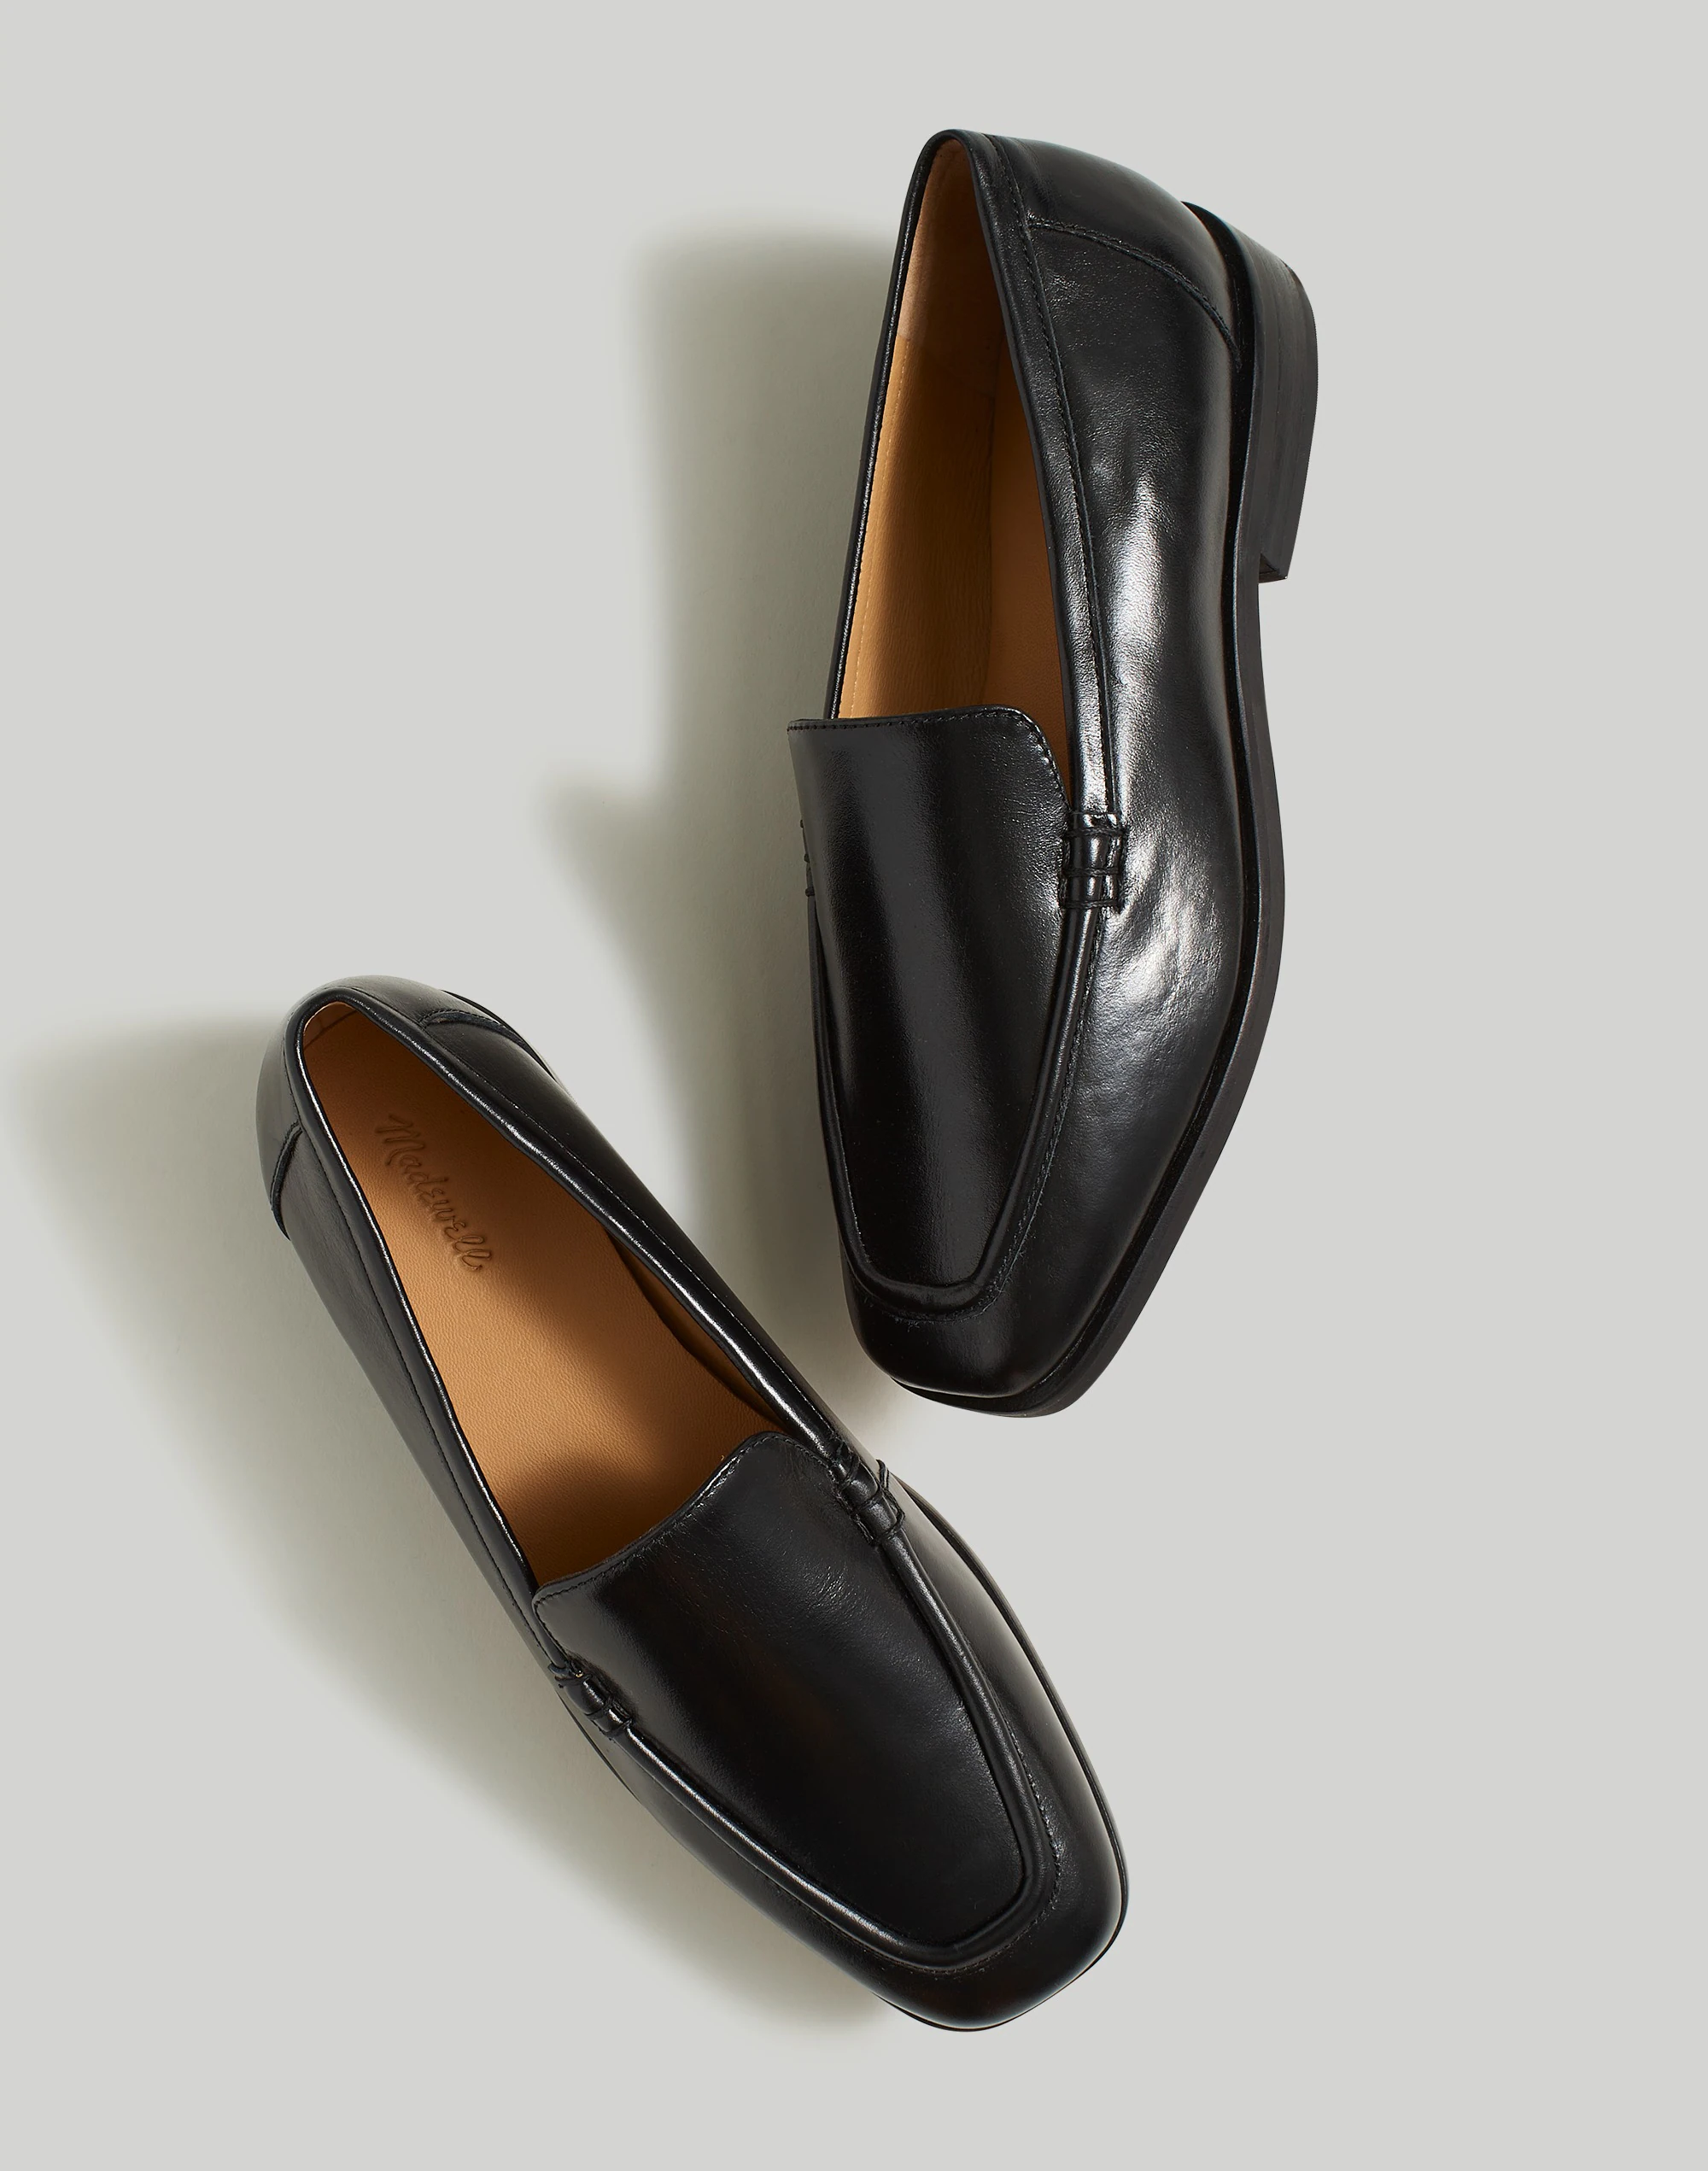 The Bennie Loafer in Leather